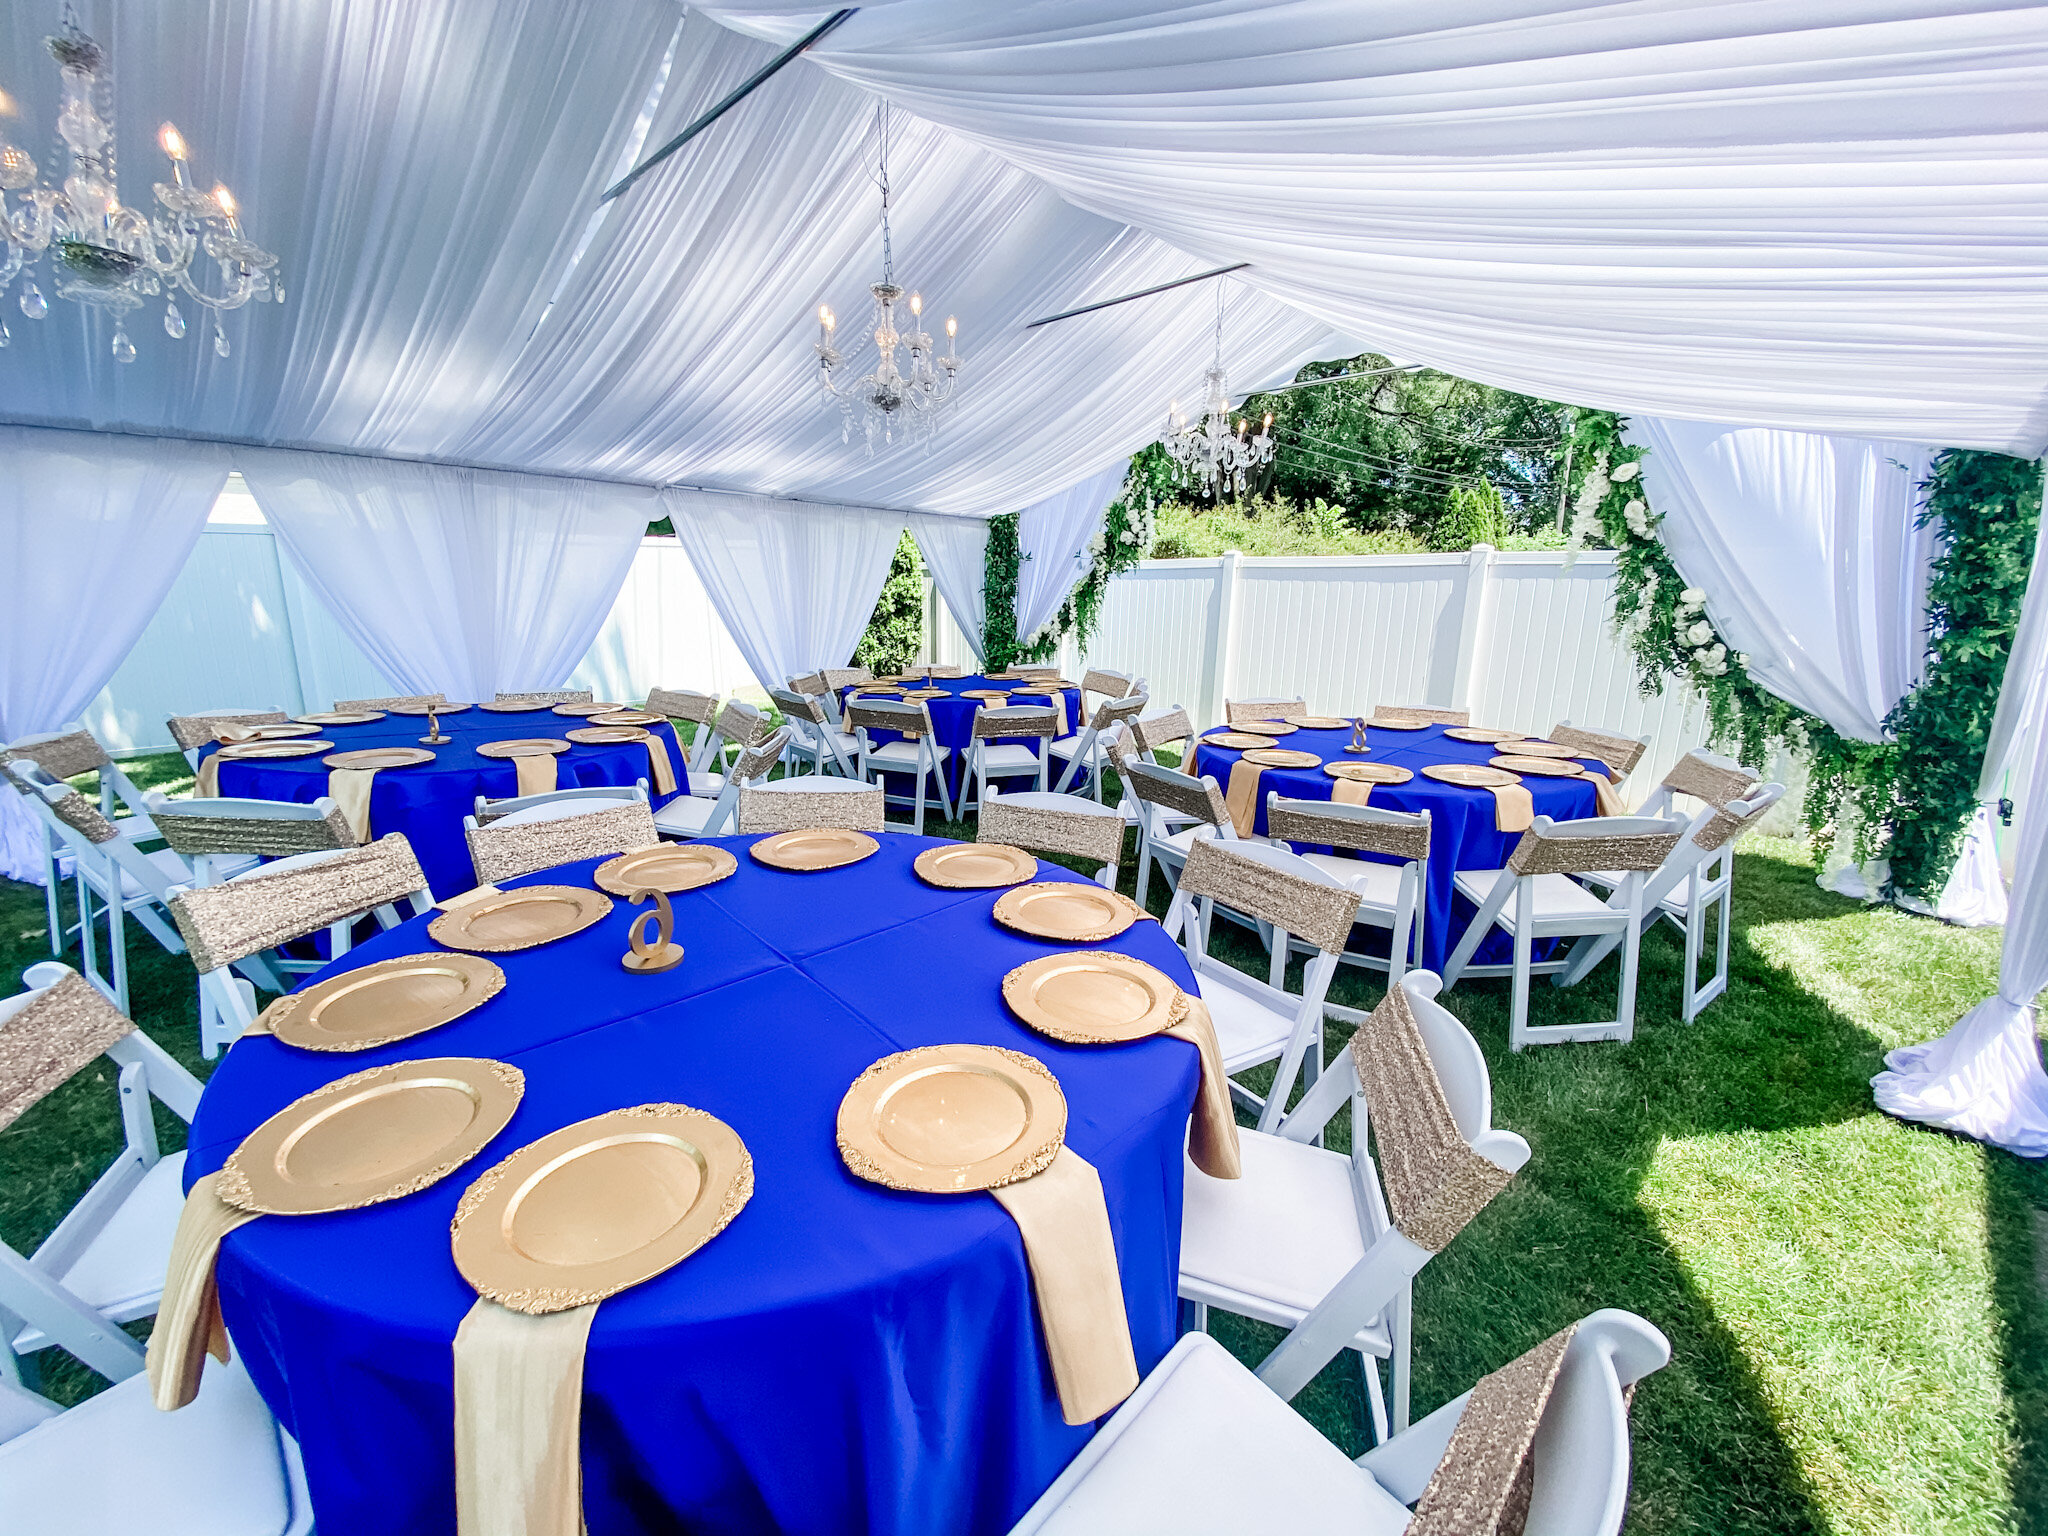 tent rental in Napervill eoutdoor party decoration backyard wedding micro wedding outdoor party rental naperville frame tents festival tent birthday party tent backyard wedding tent corpporate event tent   (13).JPG